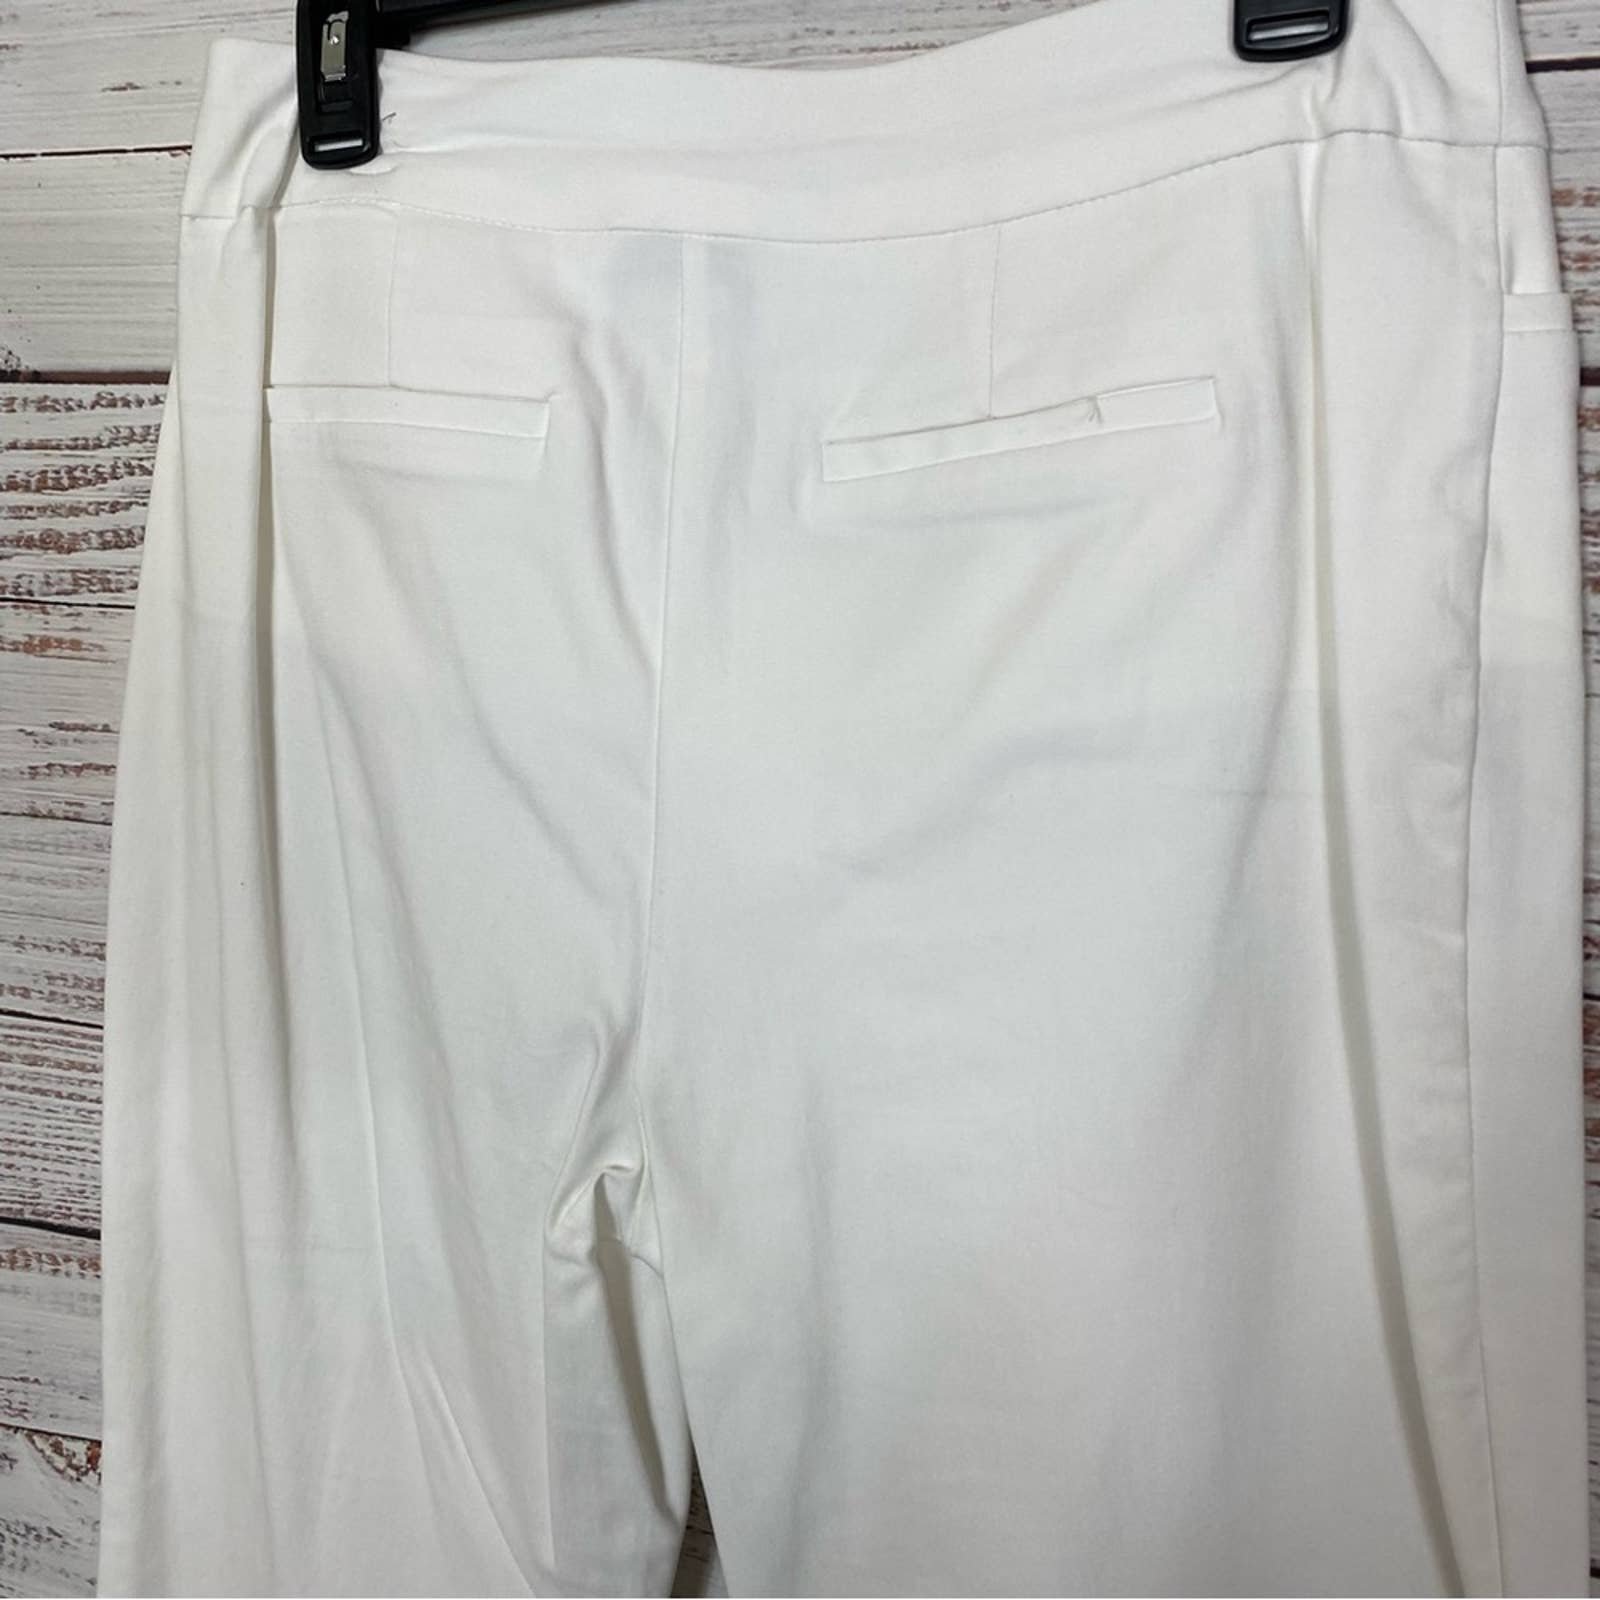 Wholesale price CHICO’S WHITE PULL ON RAYON ANKLE PANTS OyaAtOU4K New Style